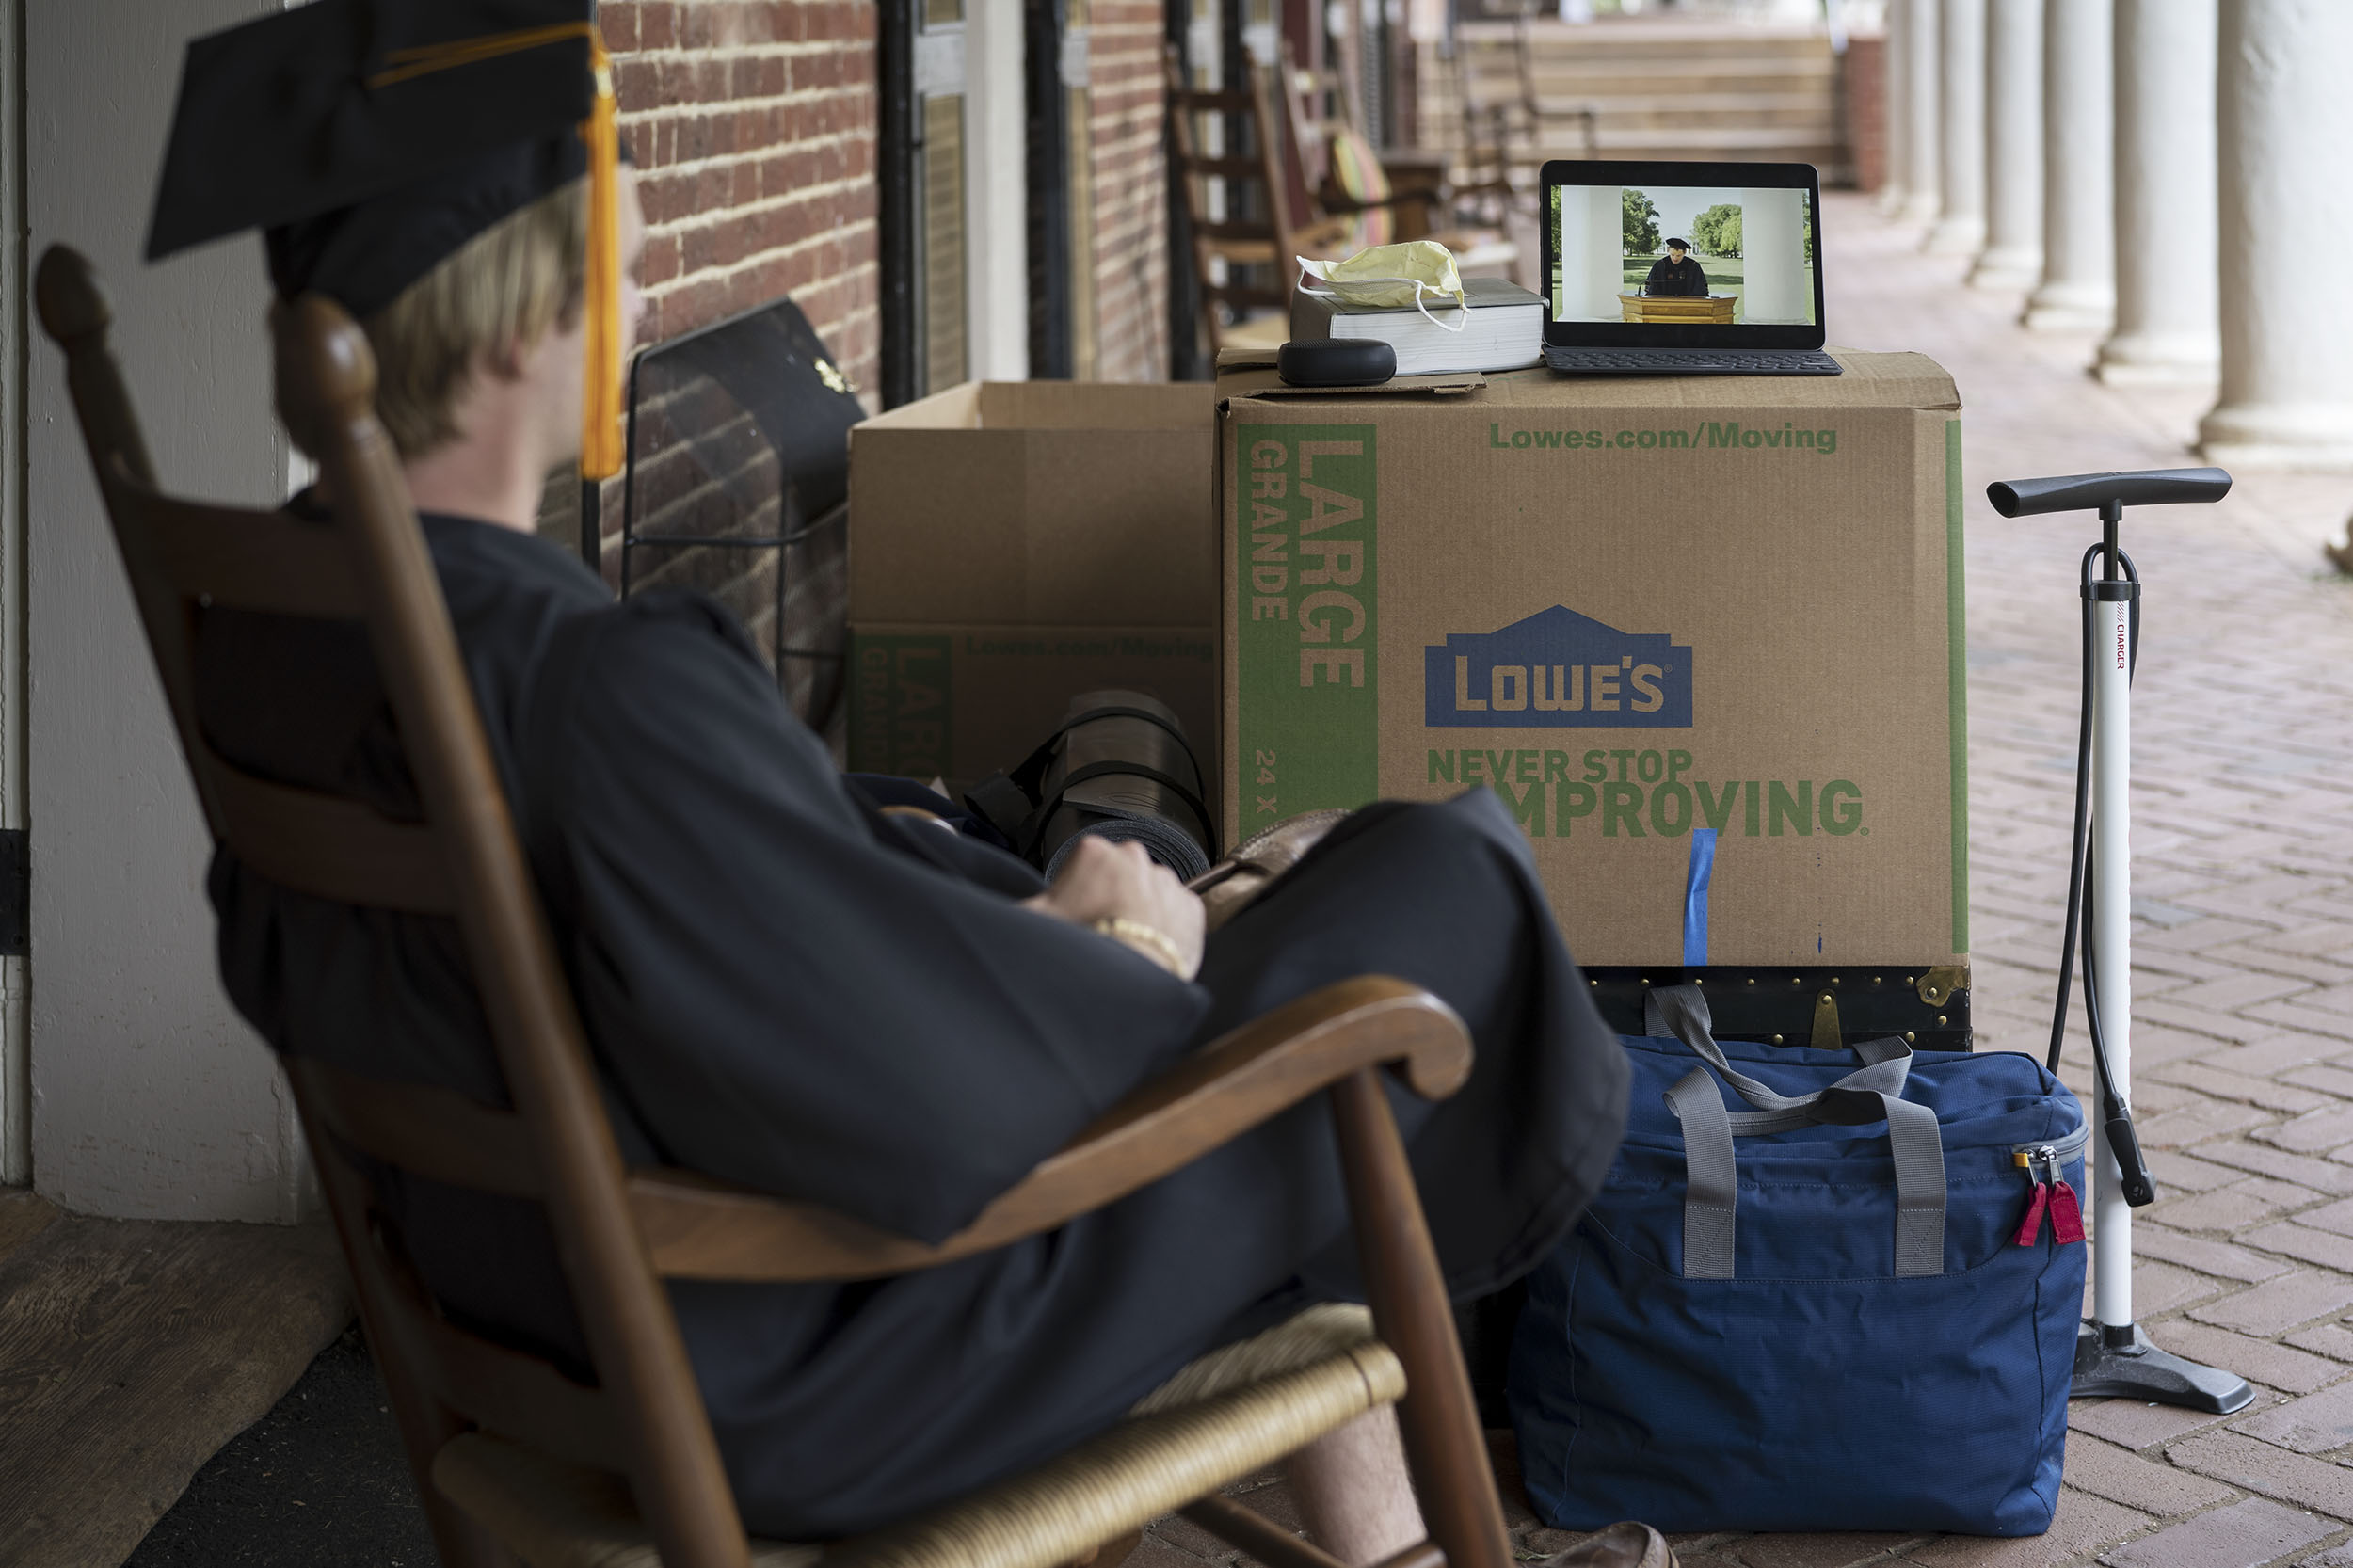 Almost nothing about graduating in 2020 was normal, but this graduate did manage to don a cap and gown while watching the virtual commencement celebration on the Lawn. (Photo by Sanjay Suchak, University Communications)